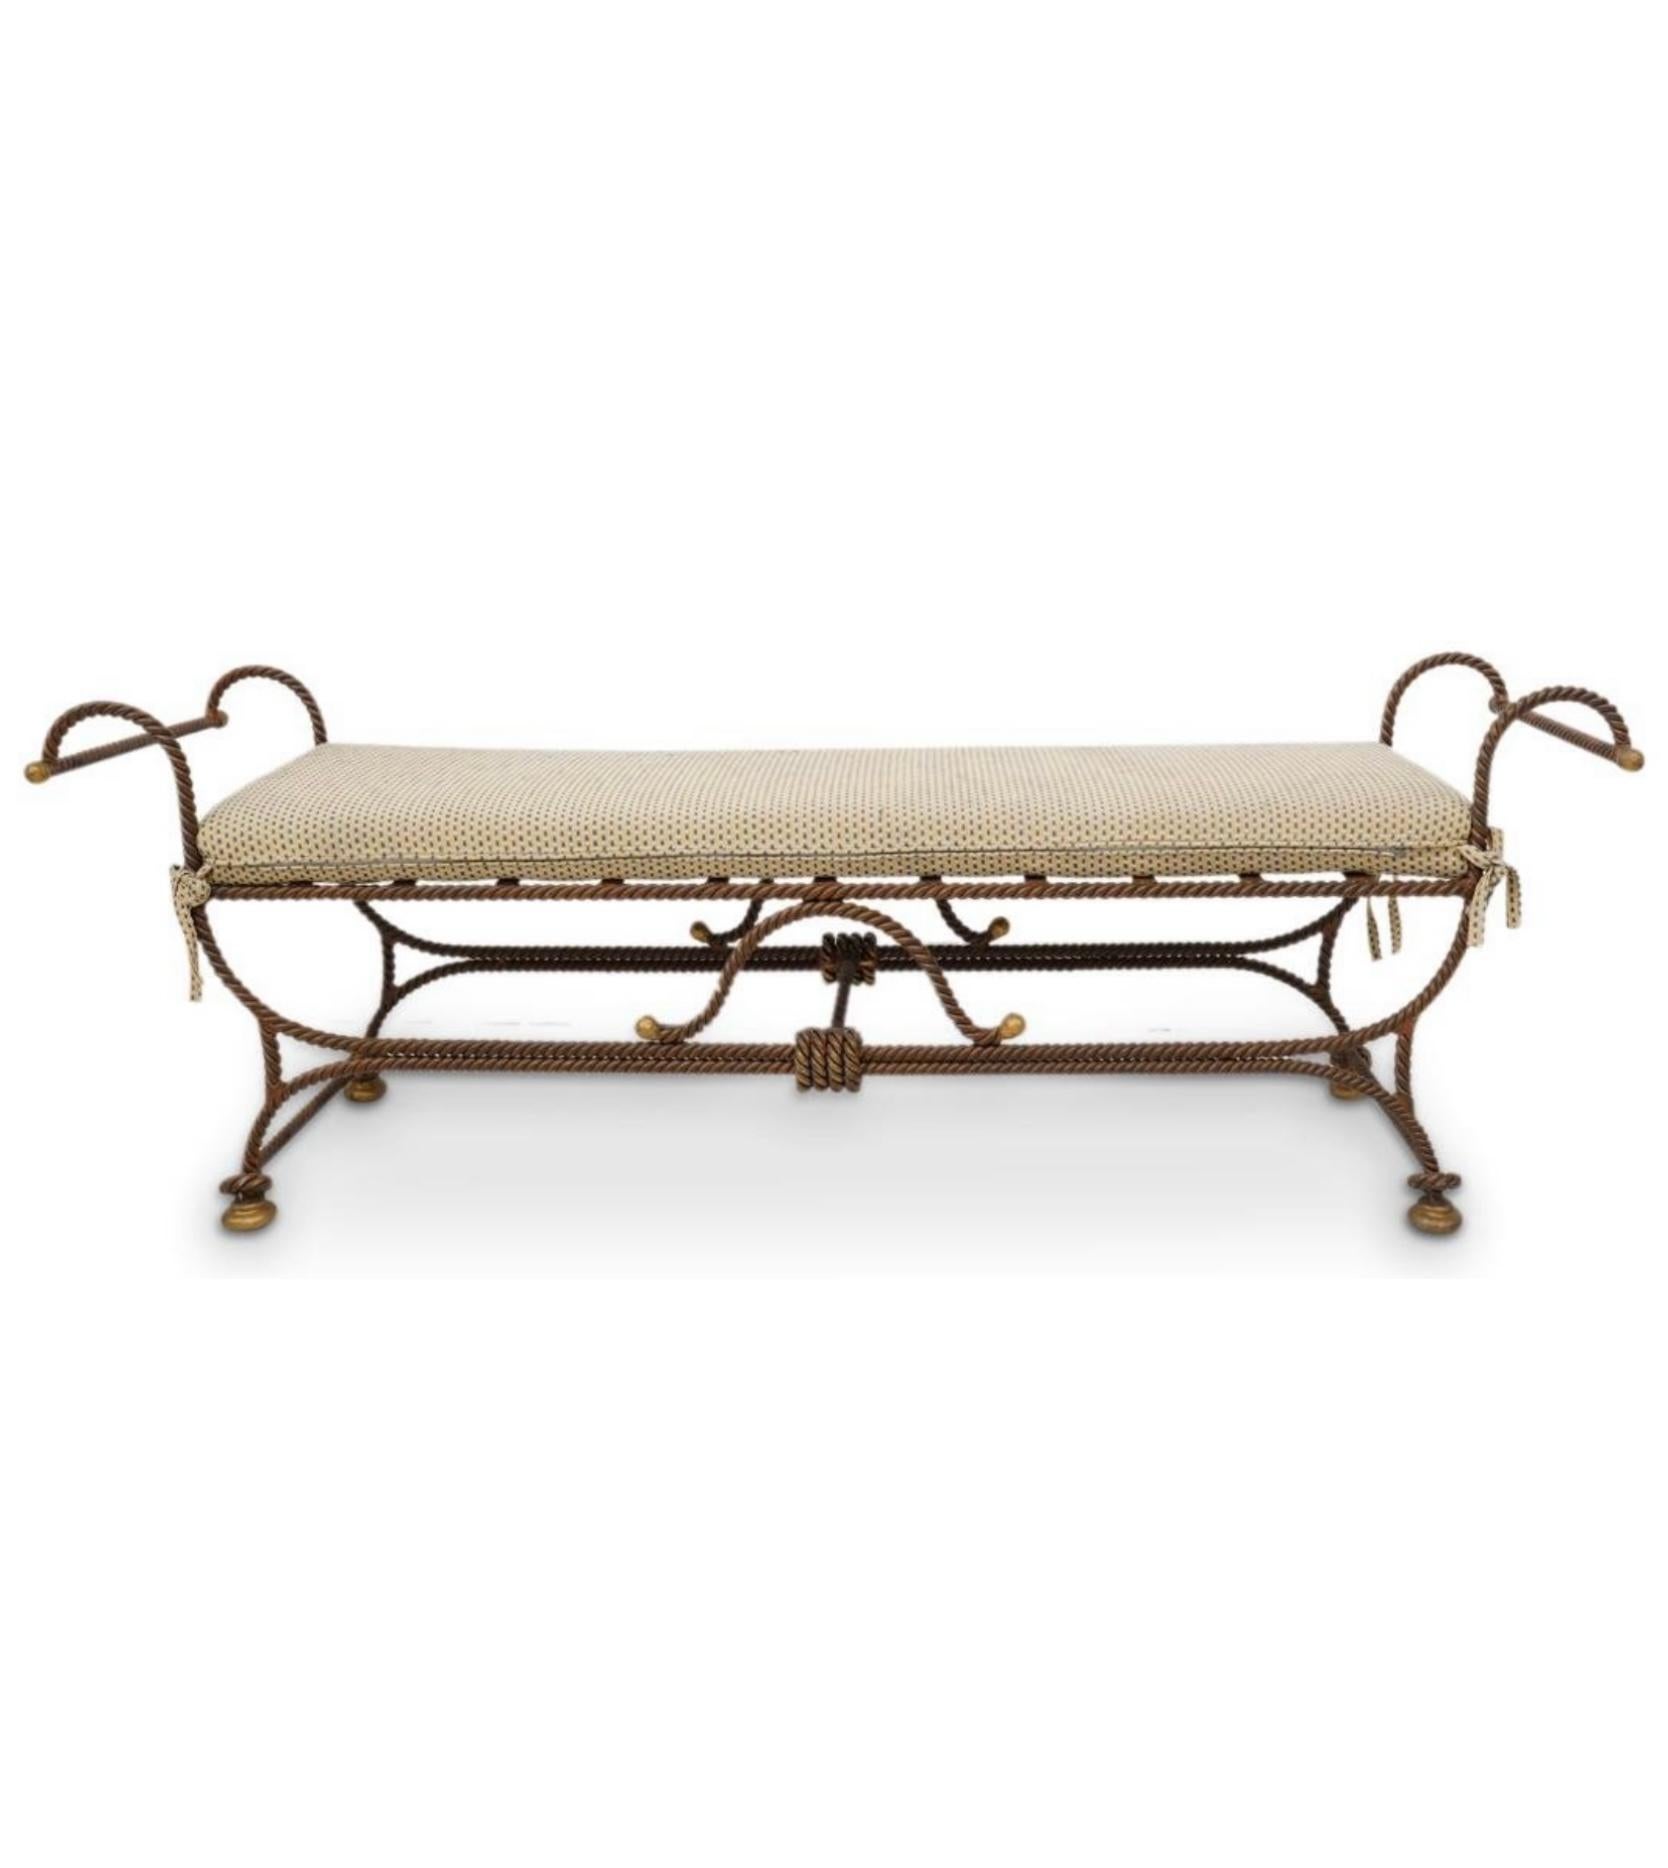 Hollywood Regency Neo-Classical Style Wrought Iron Bench W/ Rope / Tassel Motif For Sale 2